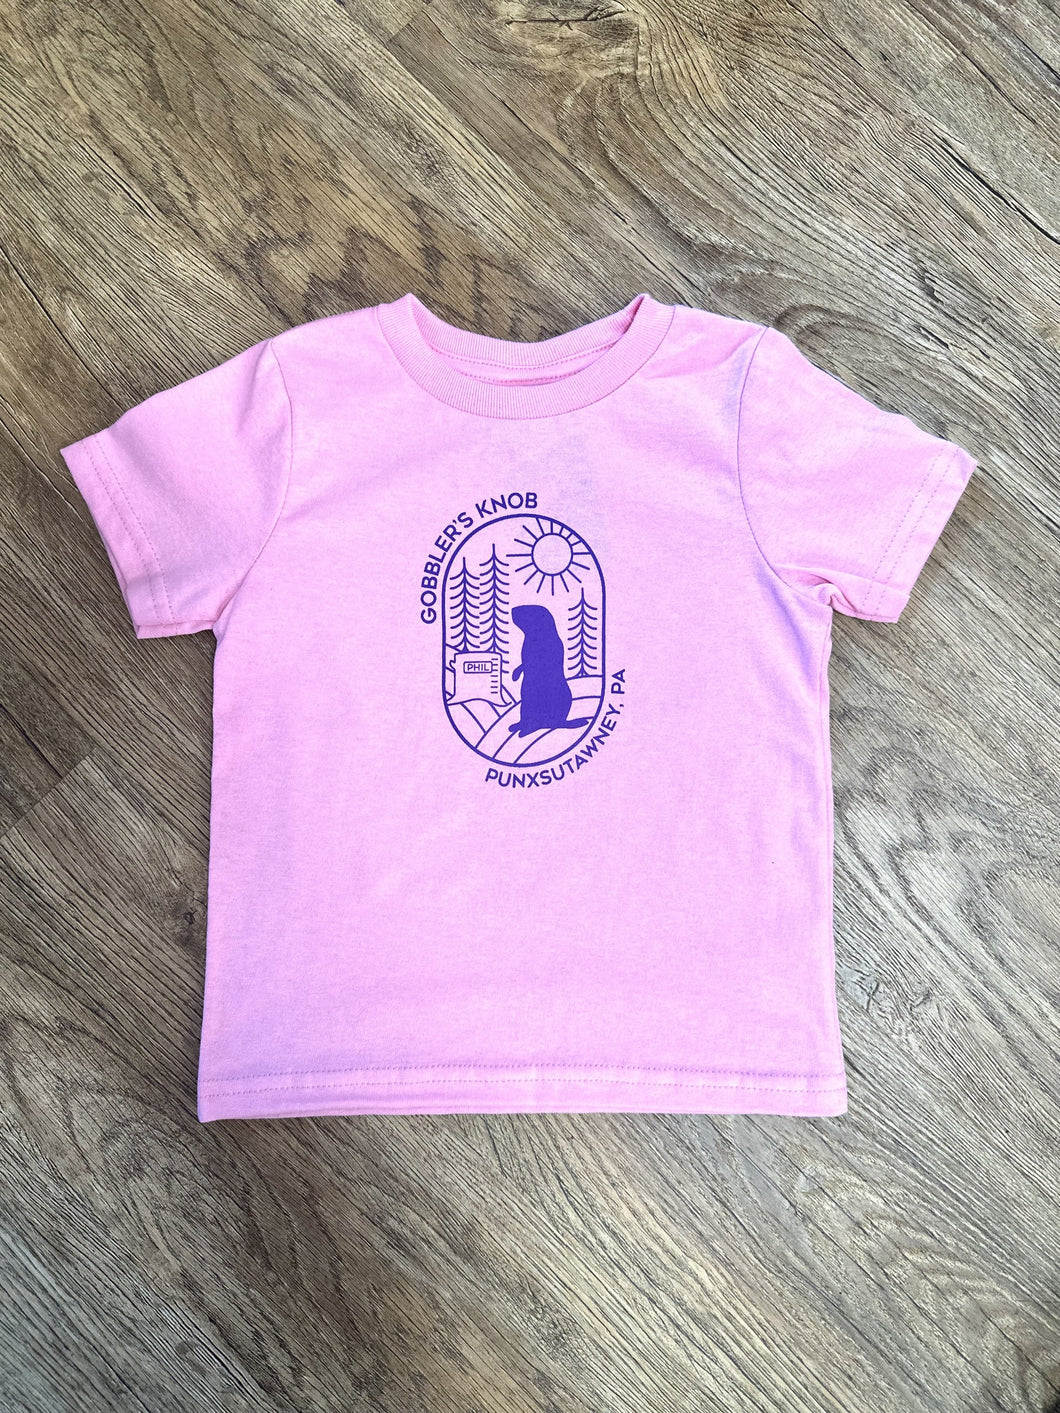 Toddler Short Sleeve Candy Pink Bubble Shirt